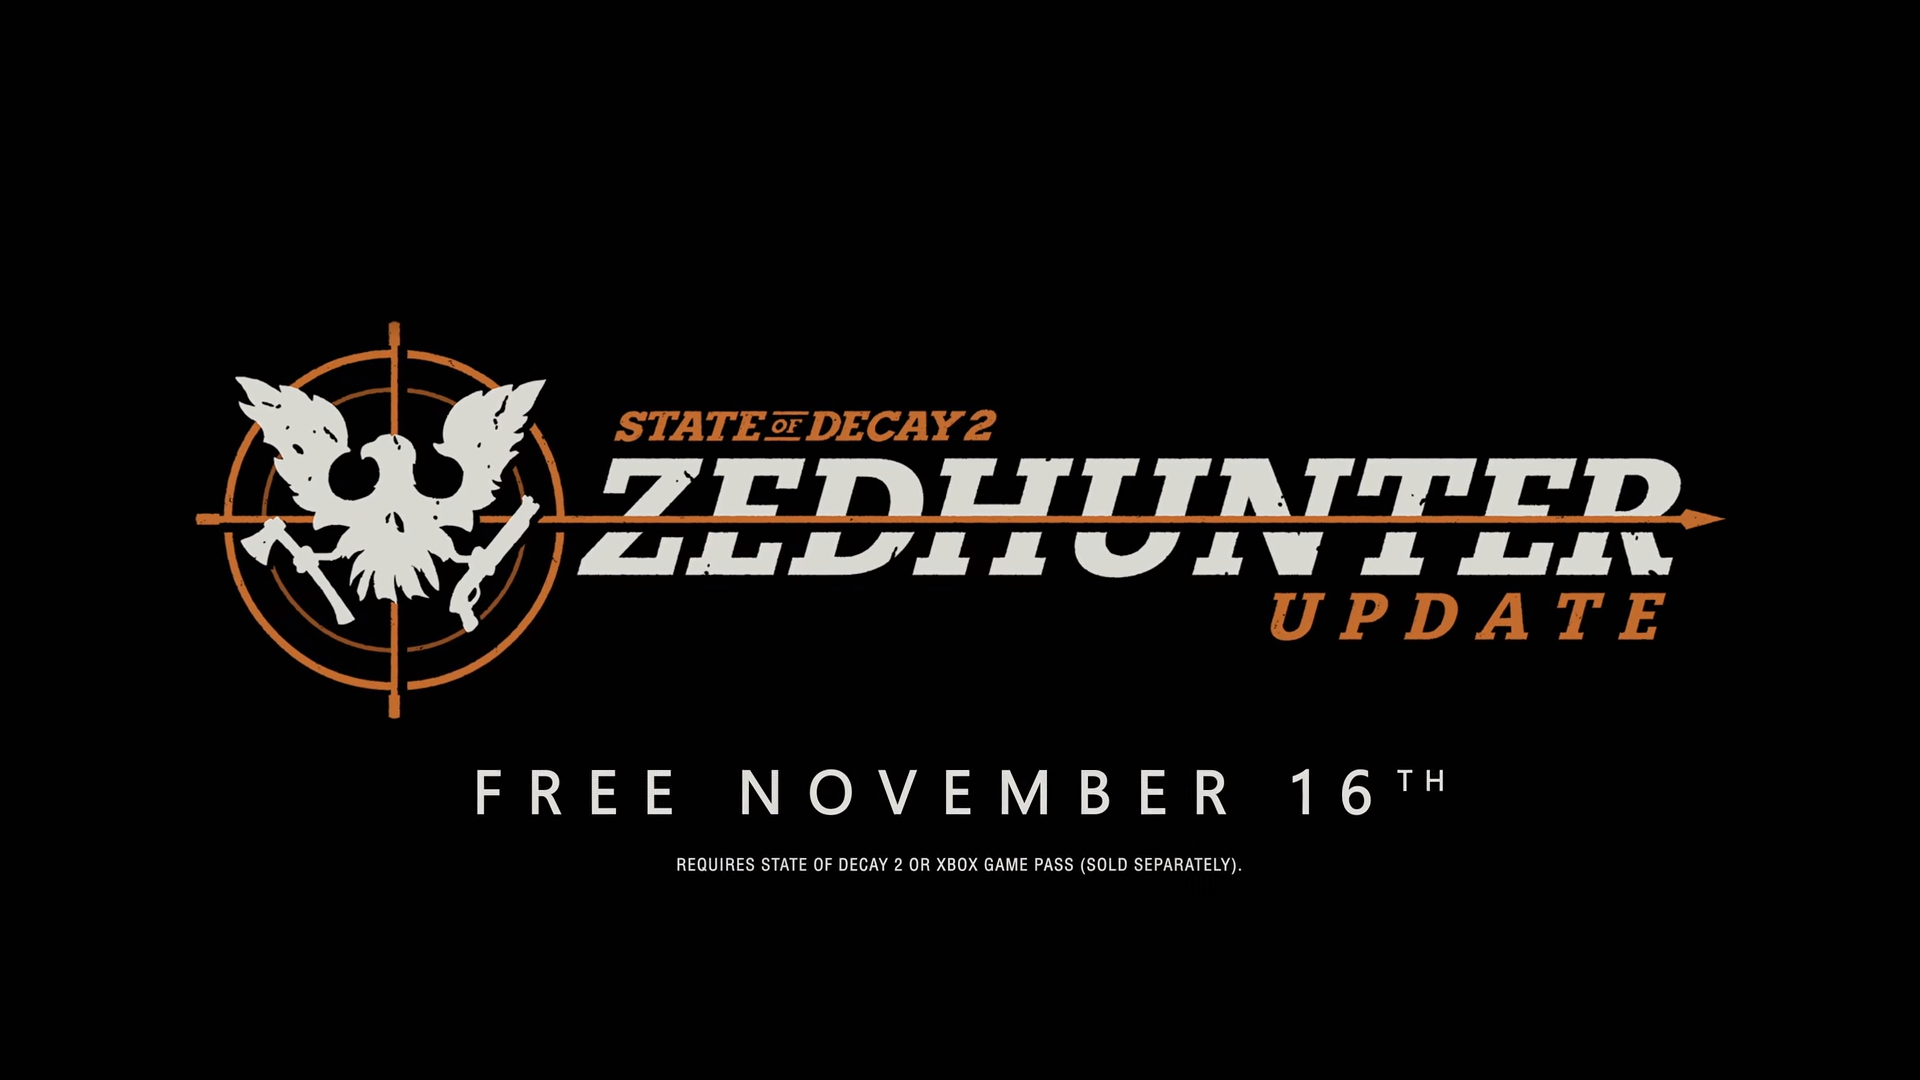 State of Decay 2 Zedhunter